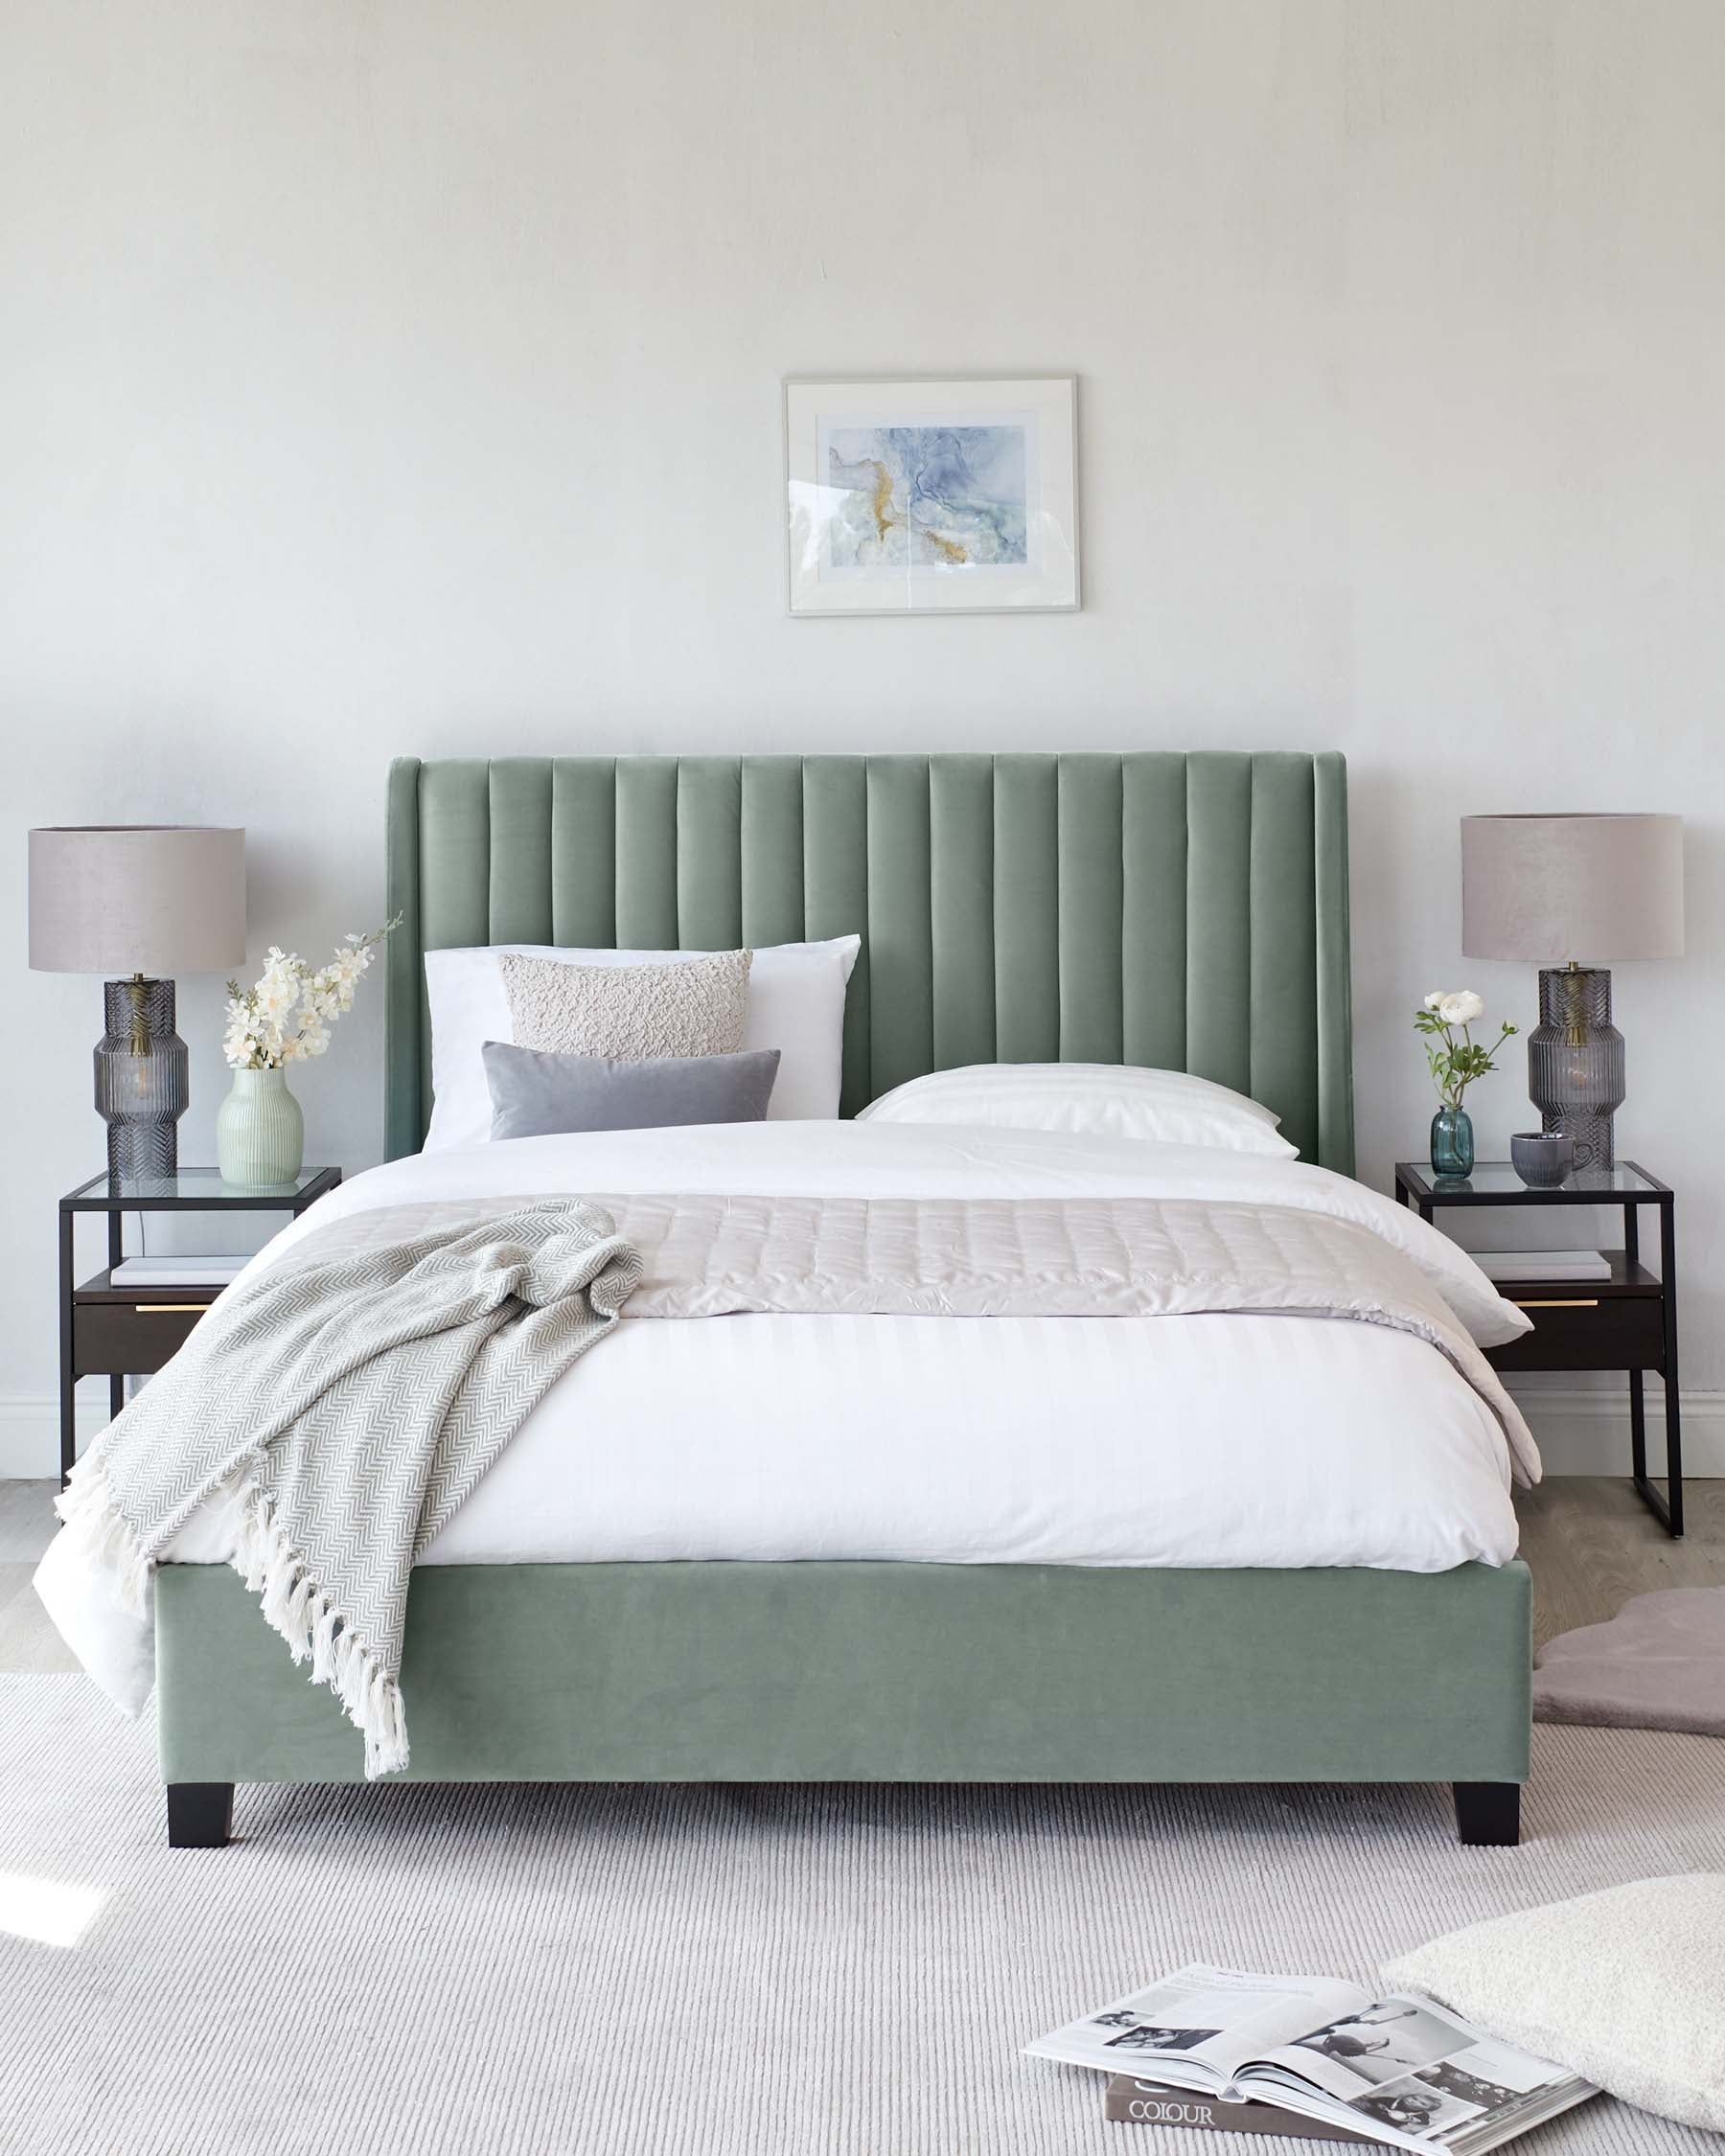 Double Headboards Beds : Double Headboards Beds Benefits and Styles for Your Bedroom Décor